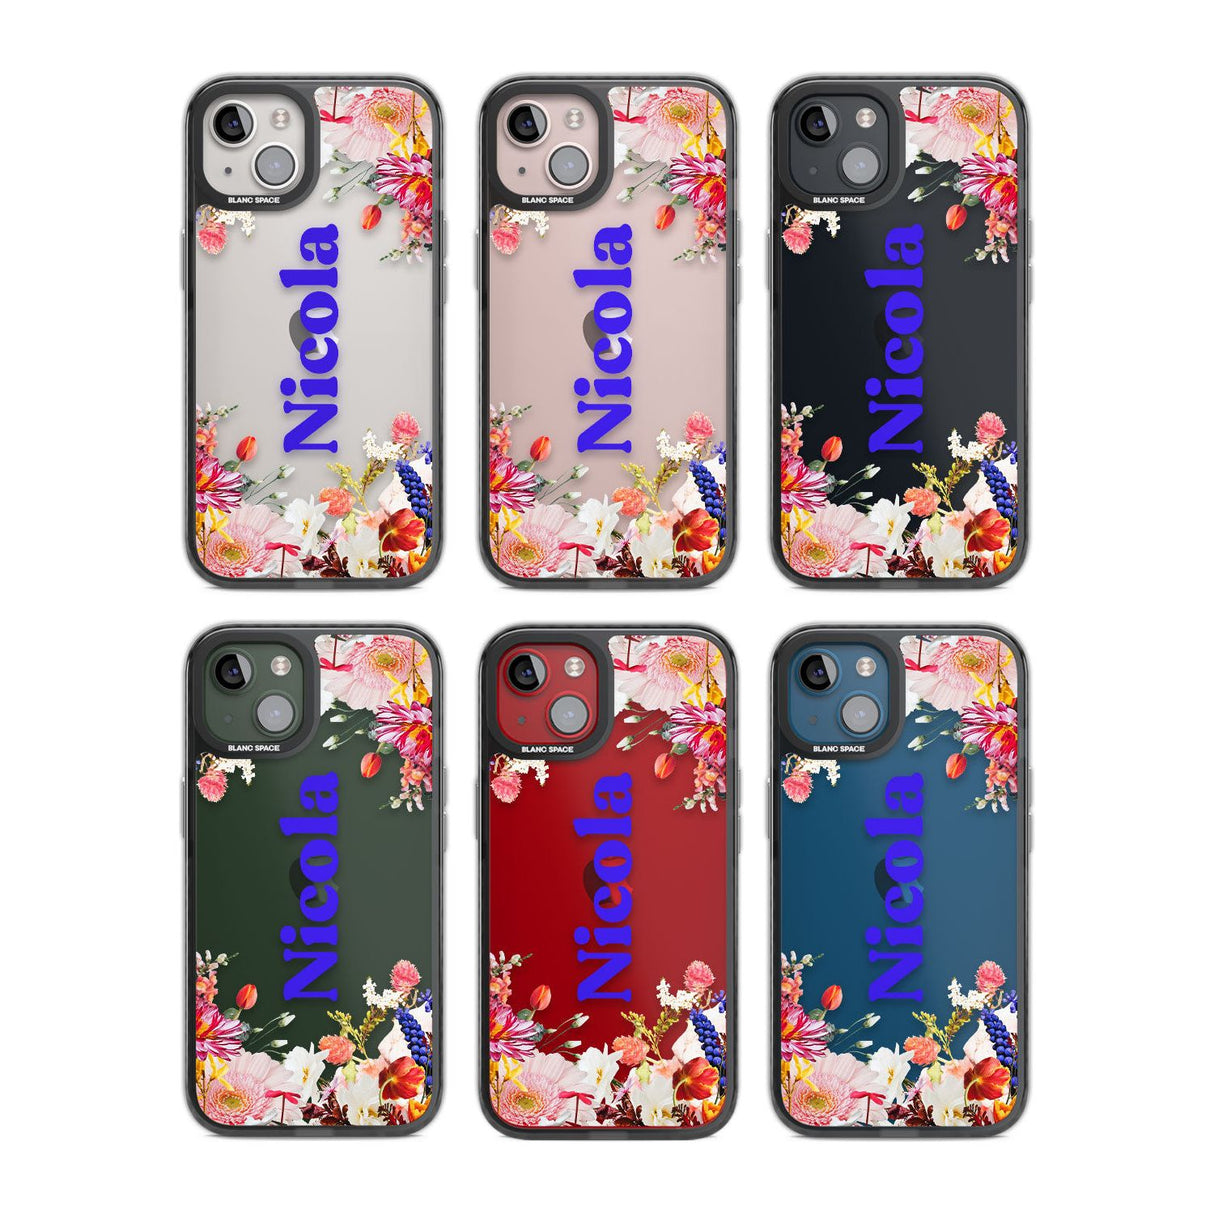 Personalised Text with Floral Borders Custom Phone Case iPhone 15 Pro Max / Black Impact Case,iPhone 15 Plus / Black Impact Case,iPhone 15 Pro / Black Impact Case,iPhone 15 / Black Impact Case,iPhone 15 Pro Max / Impact Case,iPhone 15 Plus / Impact Case,iPhone 15 Pro / Impact Case,iPhone 15 / Impact Case,iPhone 15 Pro Max / Magsafe Black Impact Case,iPhone 15 Plus / Magsafe Black Impact Case,iPhone 15 Pro / Magsafe Black Impact Case,iPhone 15 / Magsafe Black Impact Case,iPhone 14 Pro Max / Black Impact Case